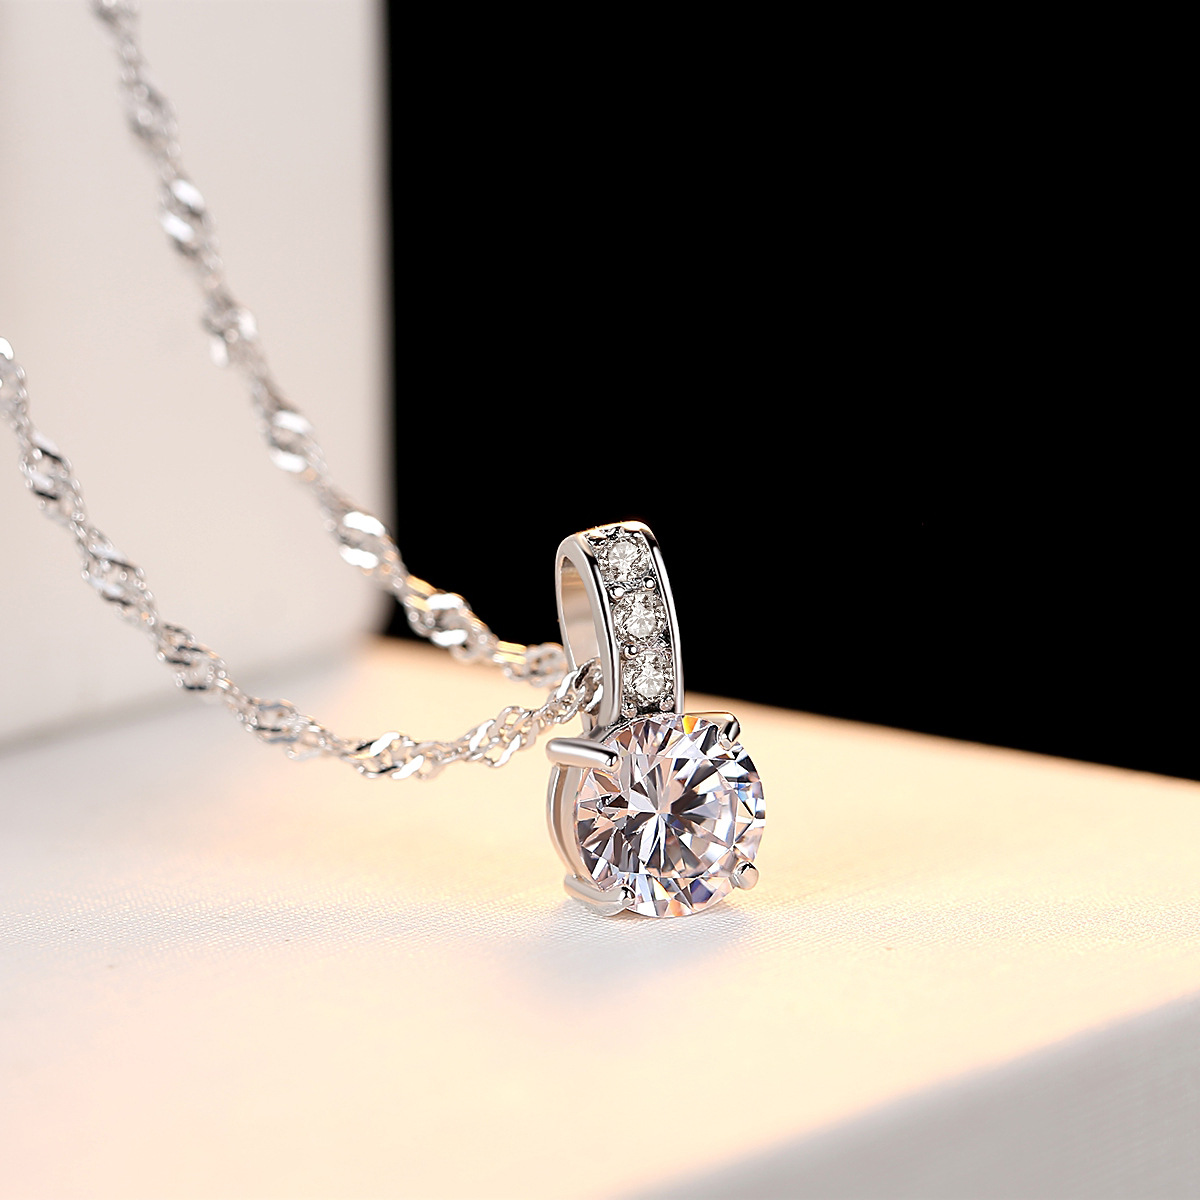 Sparkling Sterling Silver Cz Clavicle Necklace